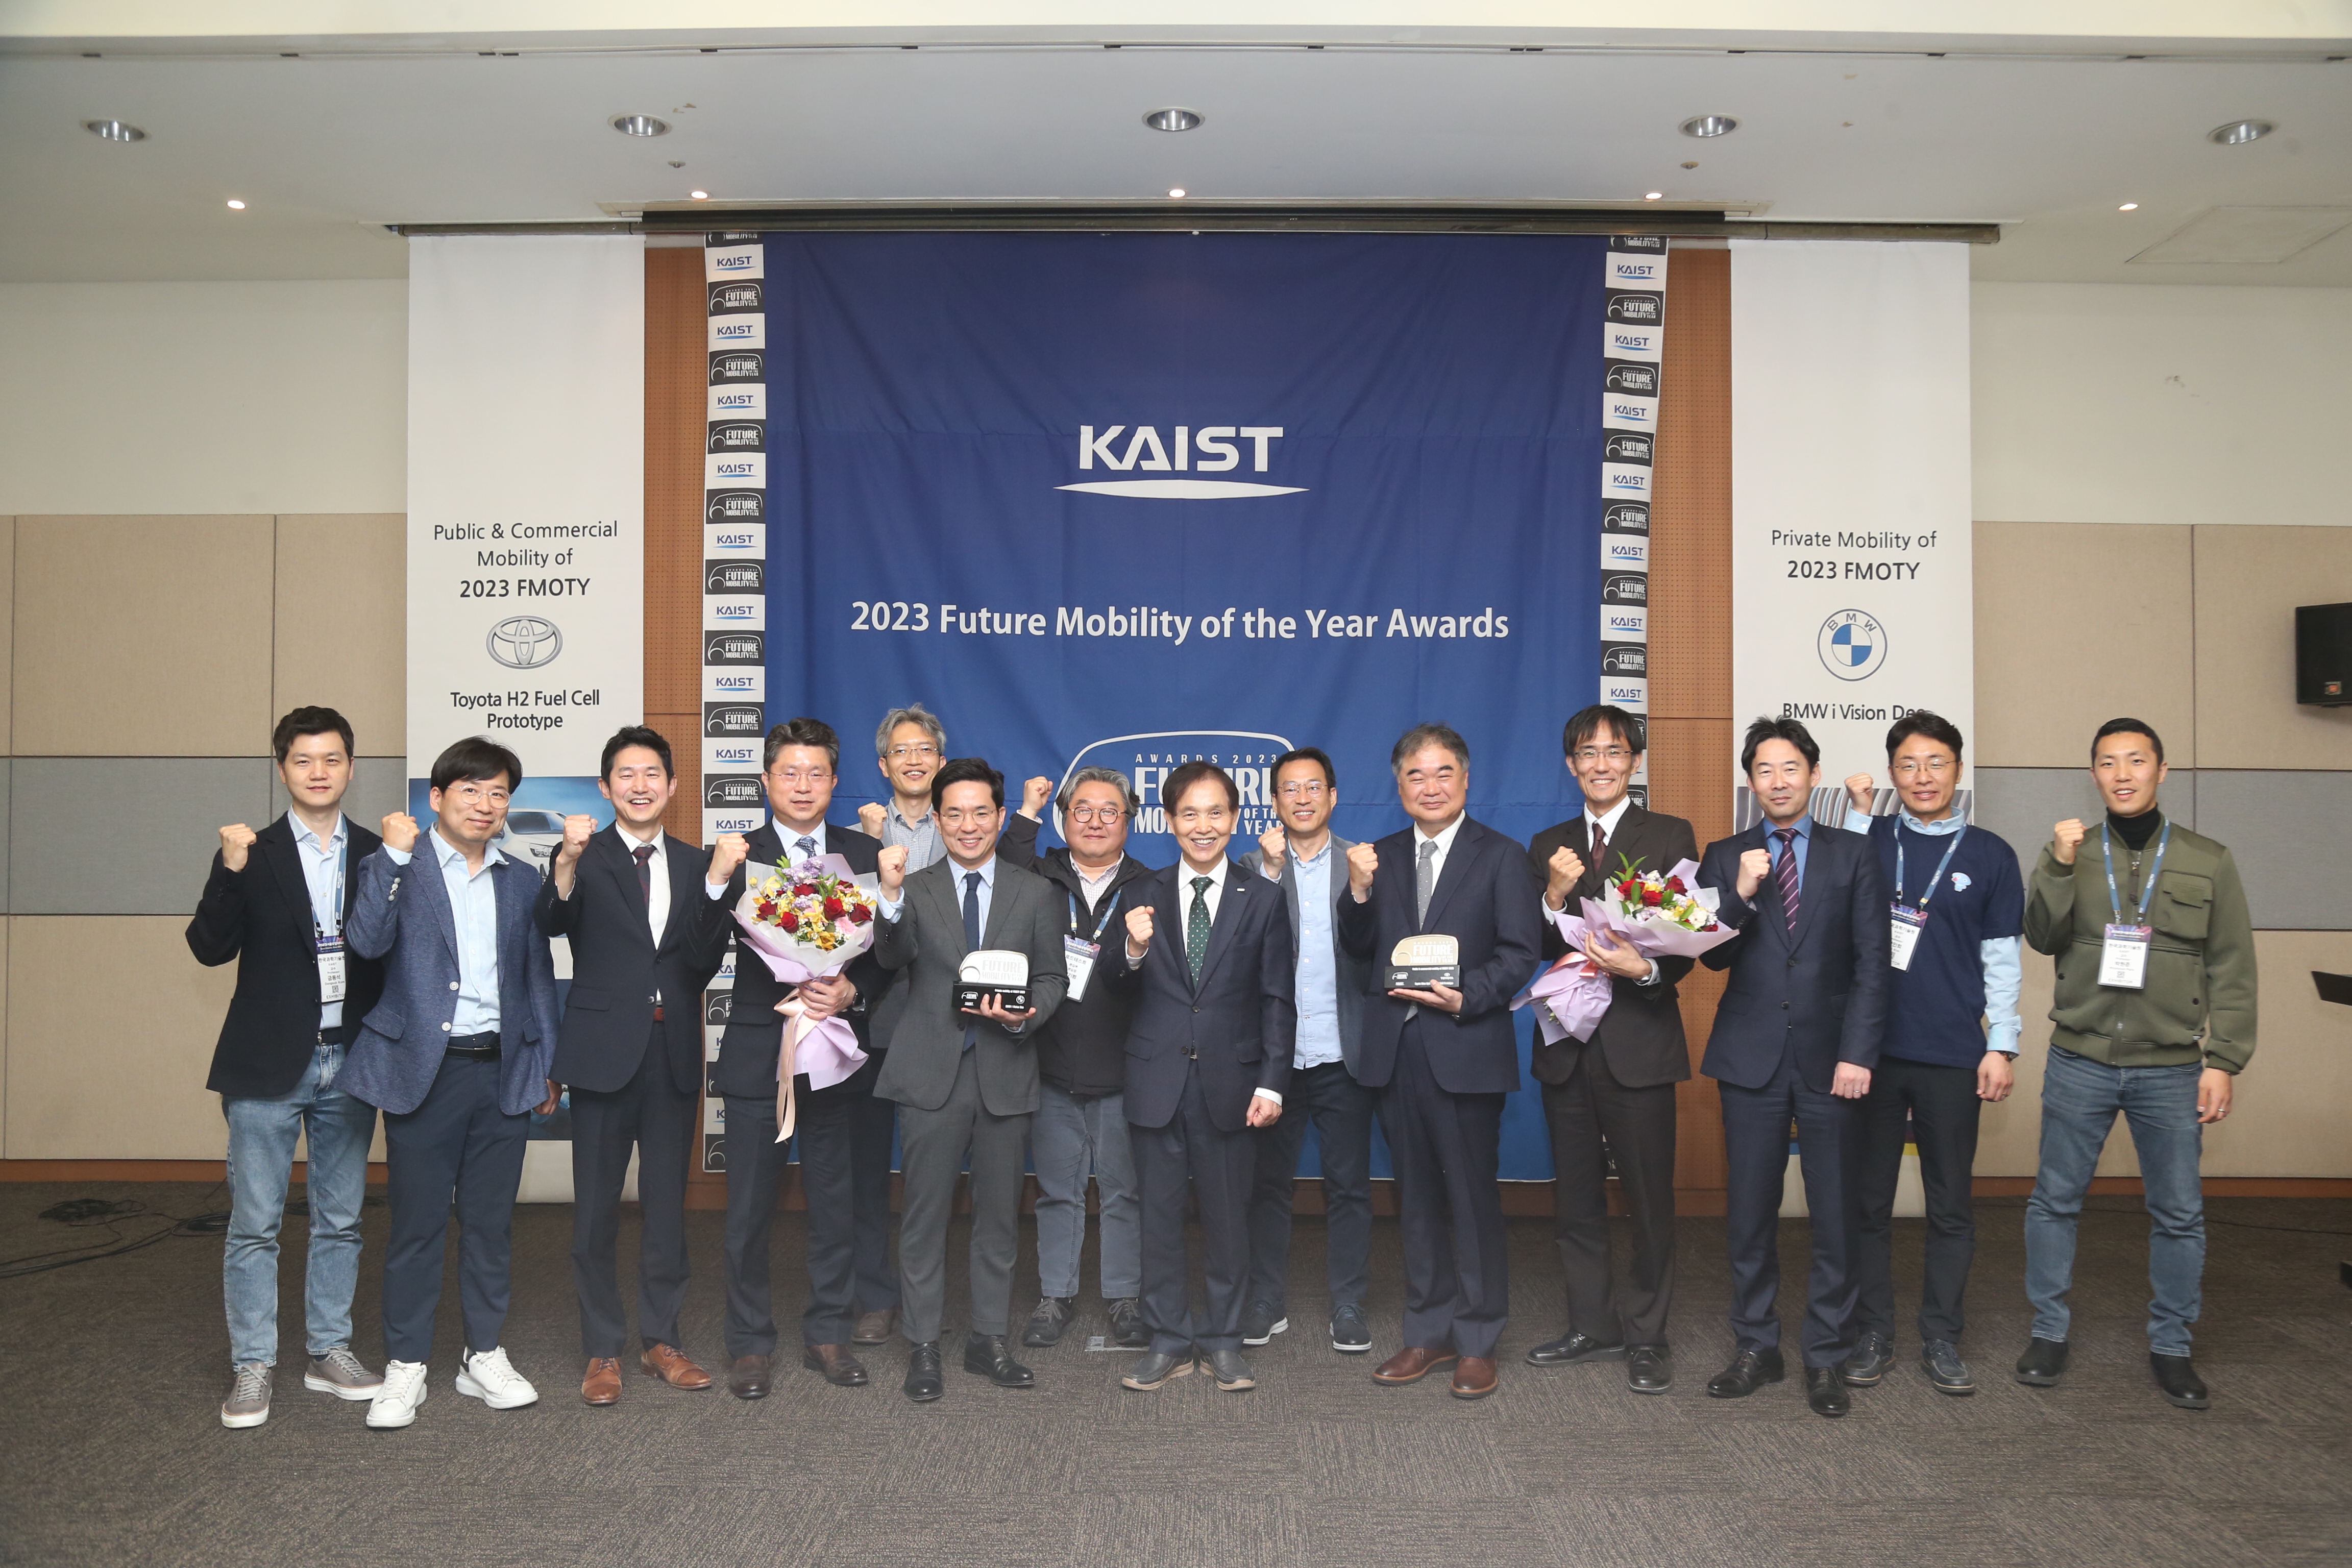 #Forum. 3/31 KAIST 퓨처모빌리티 시상식 (KAIST Future Mobility of the Year Awards) ｜SMS2023